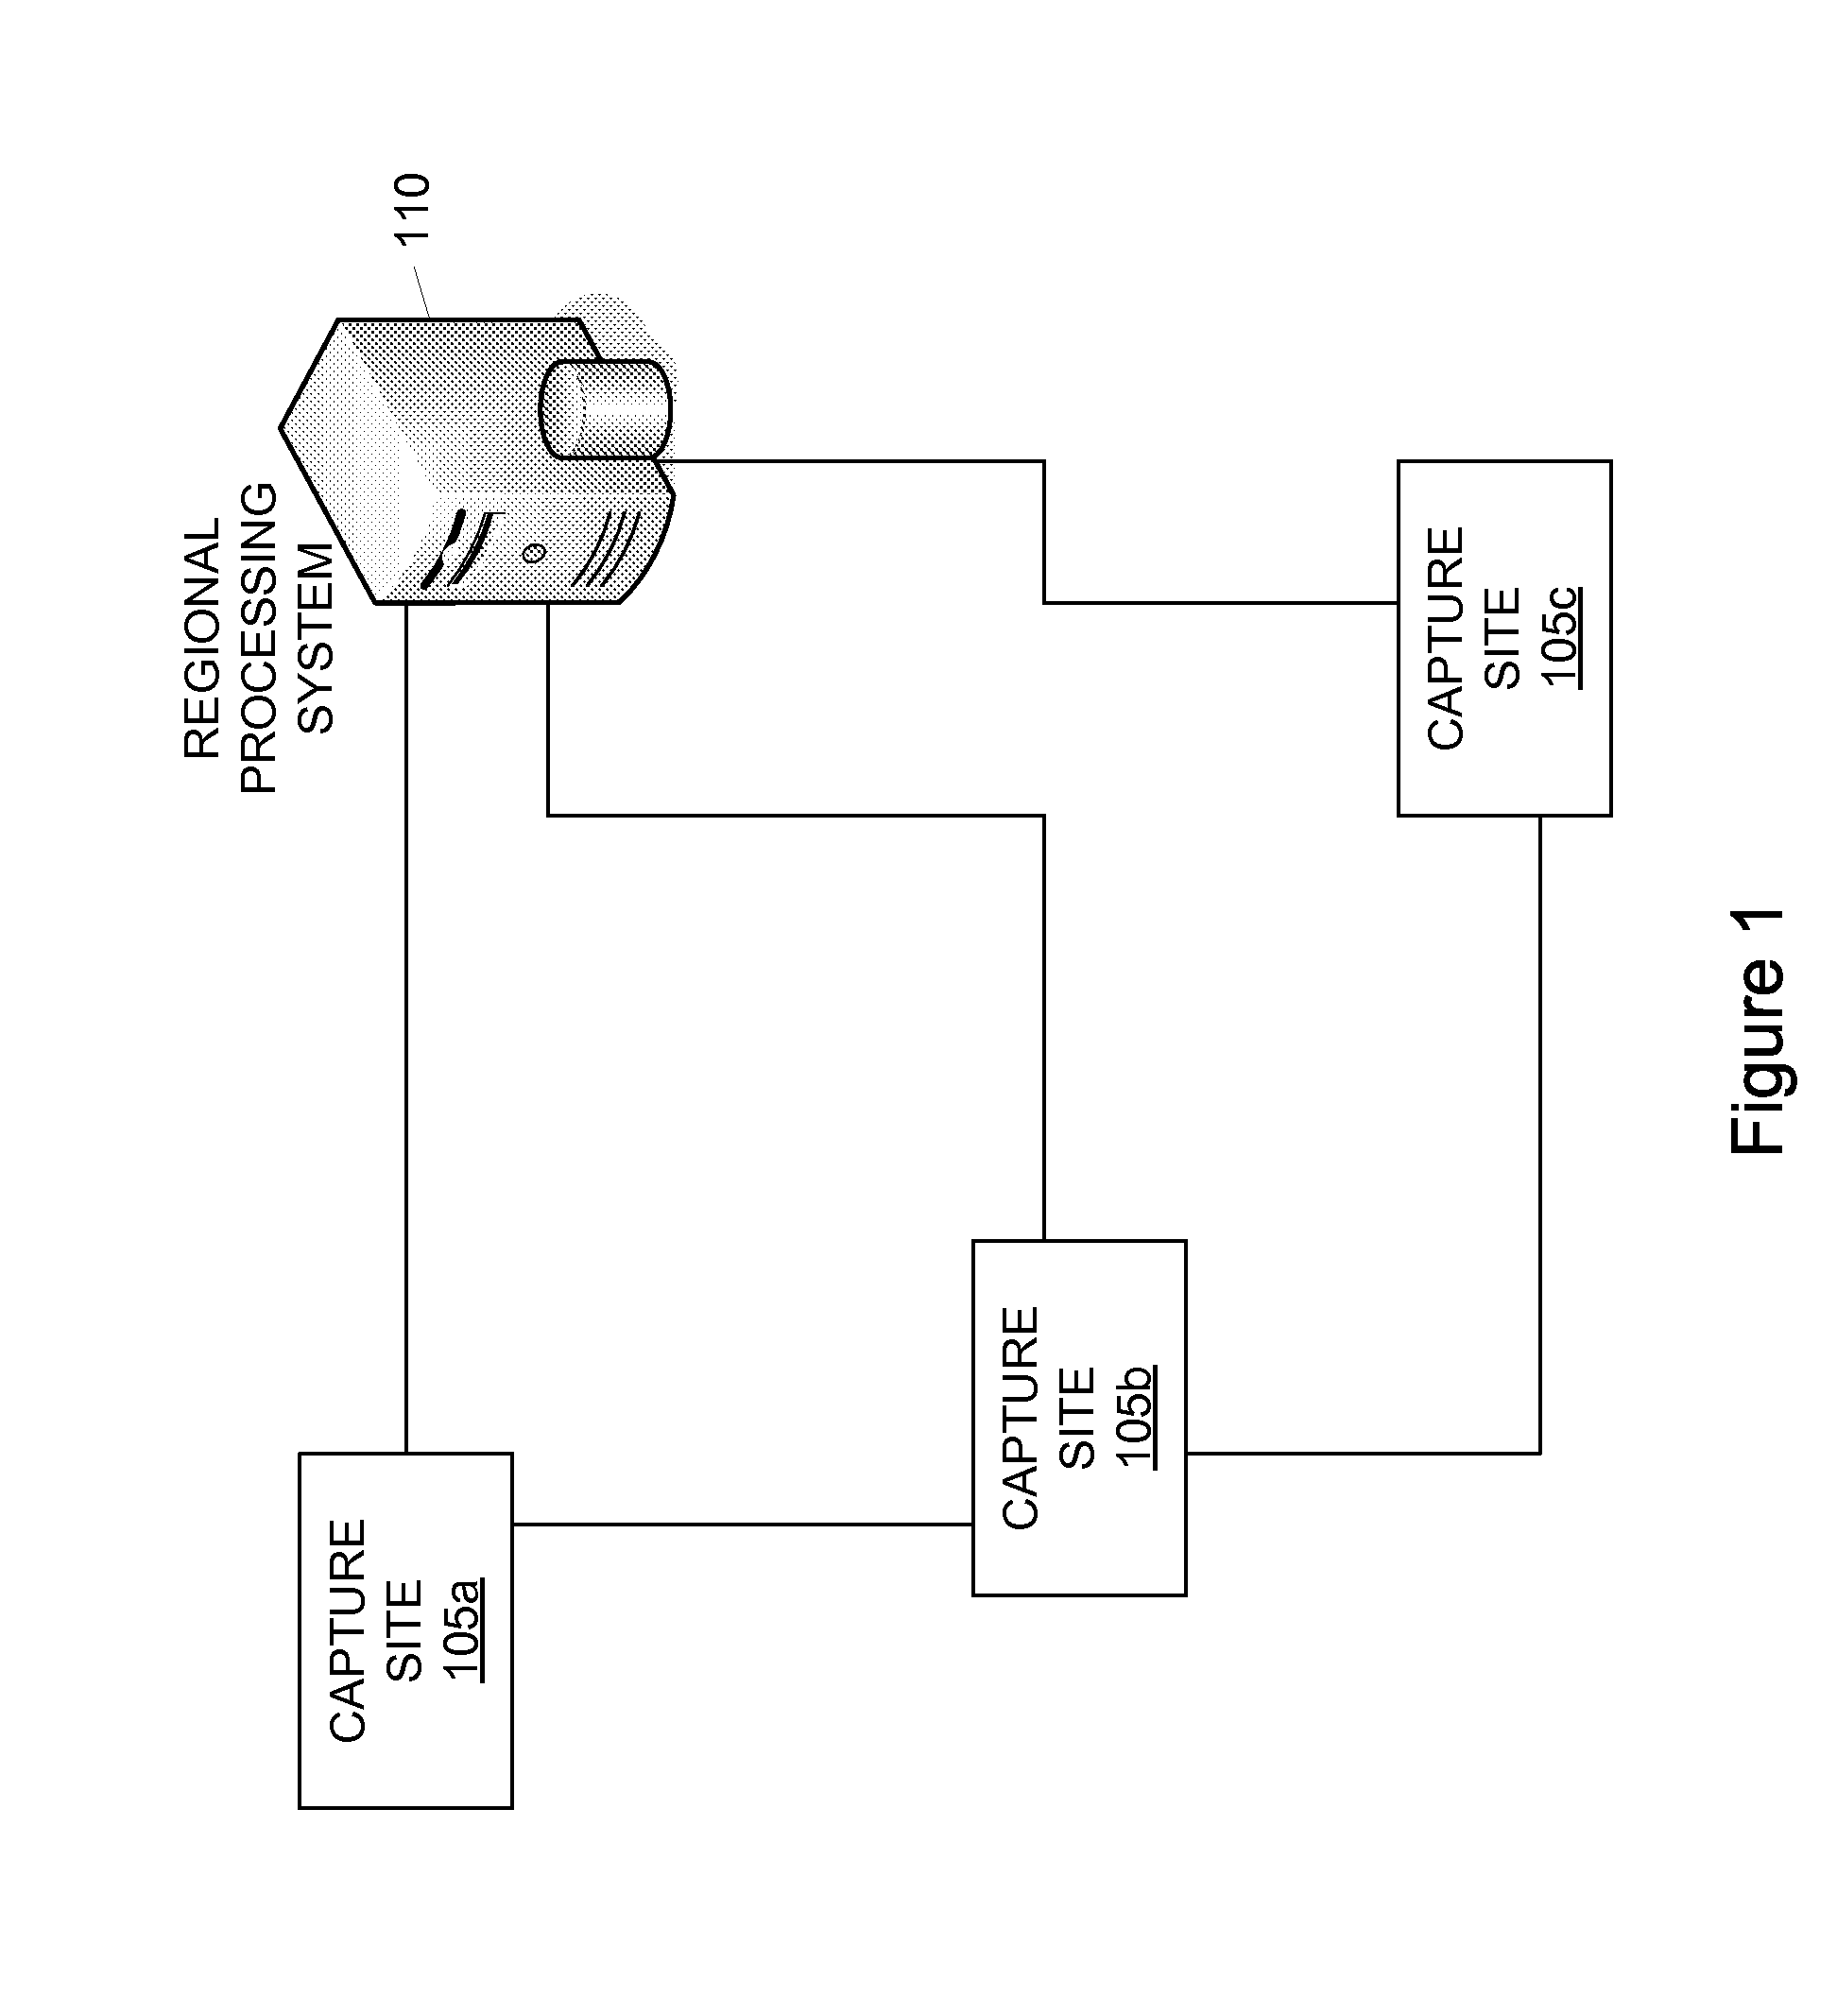 System and method for duplicate detection